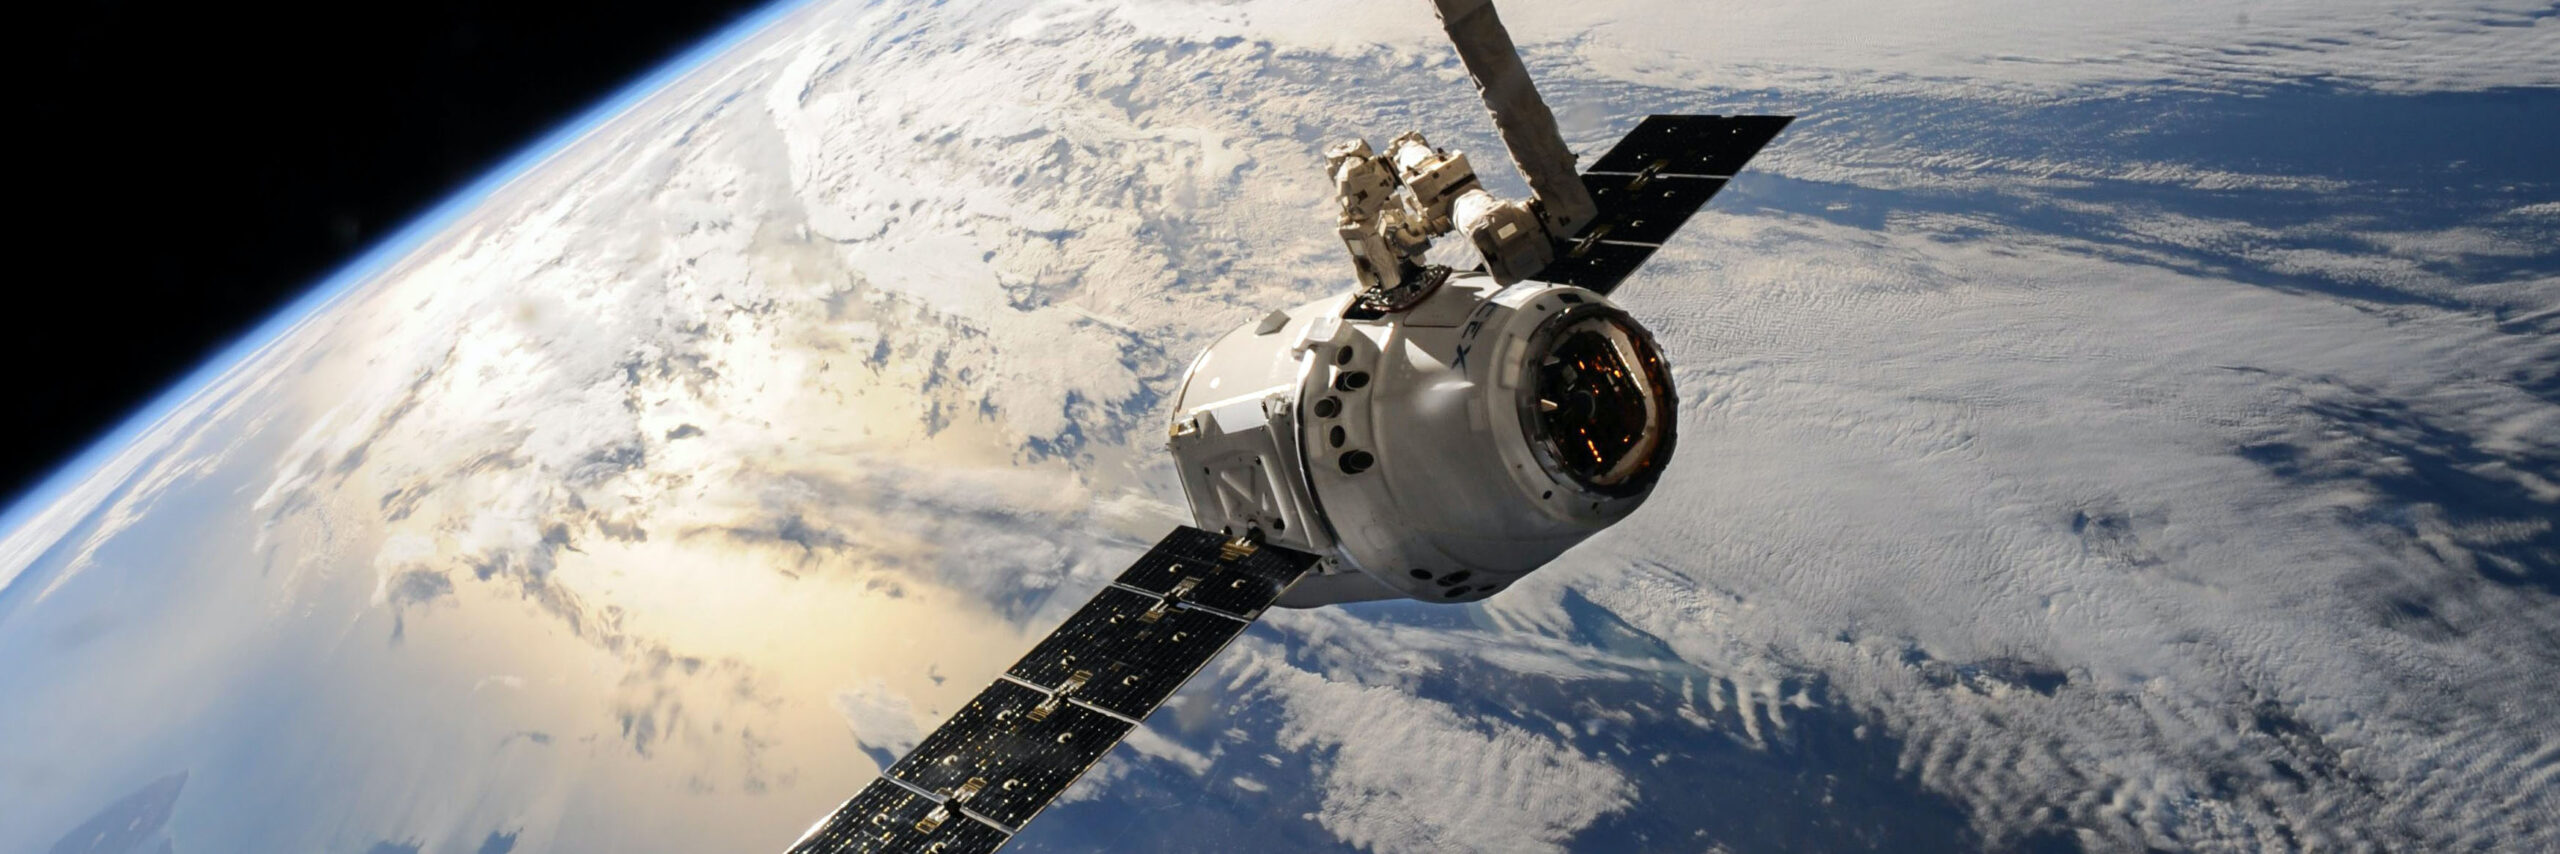 SpaceX Satellite in space